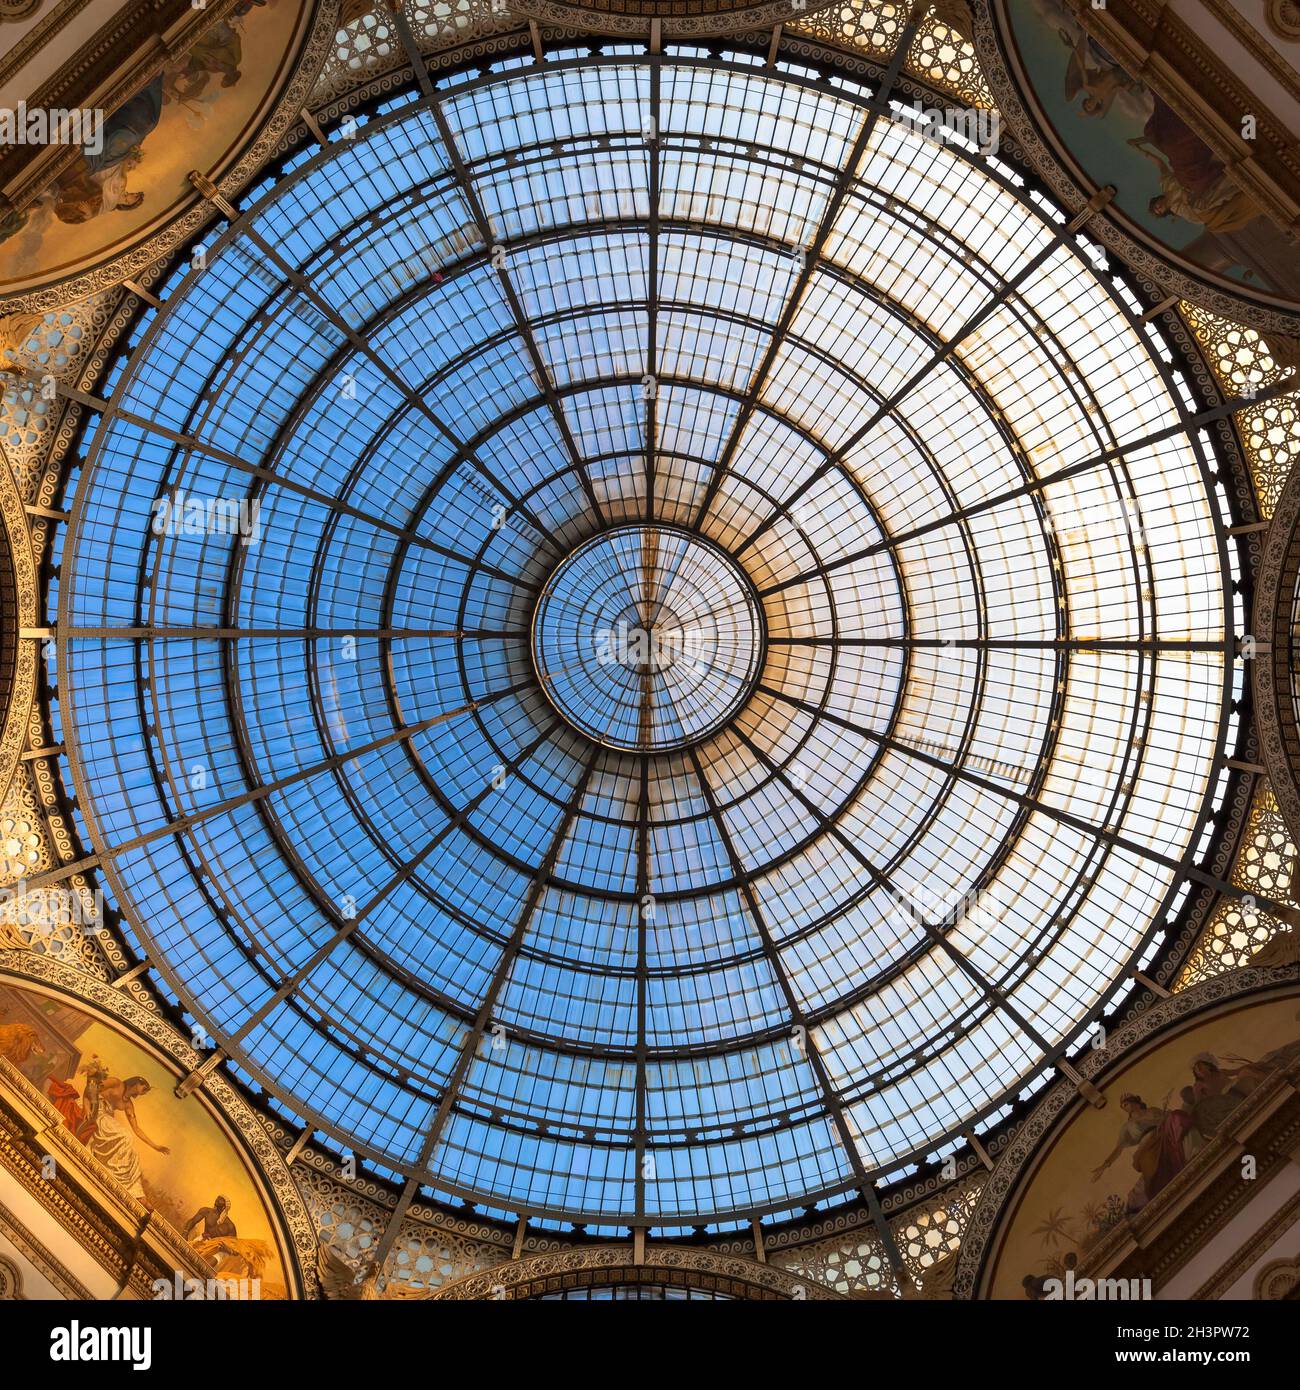 Architecture in Milan fashion Gallery, Italy. Dome roof architectural detail. Stock Photo